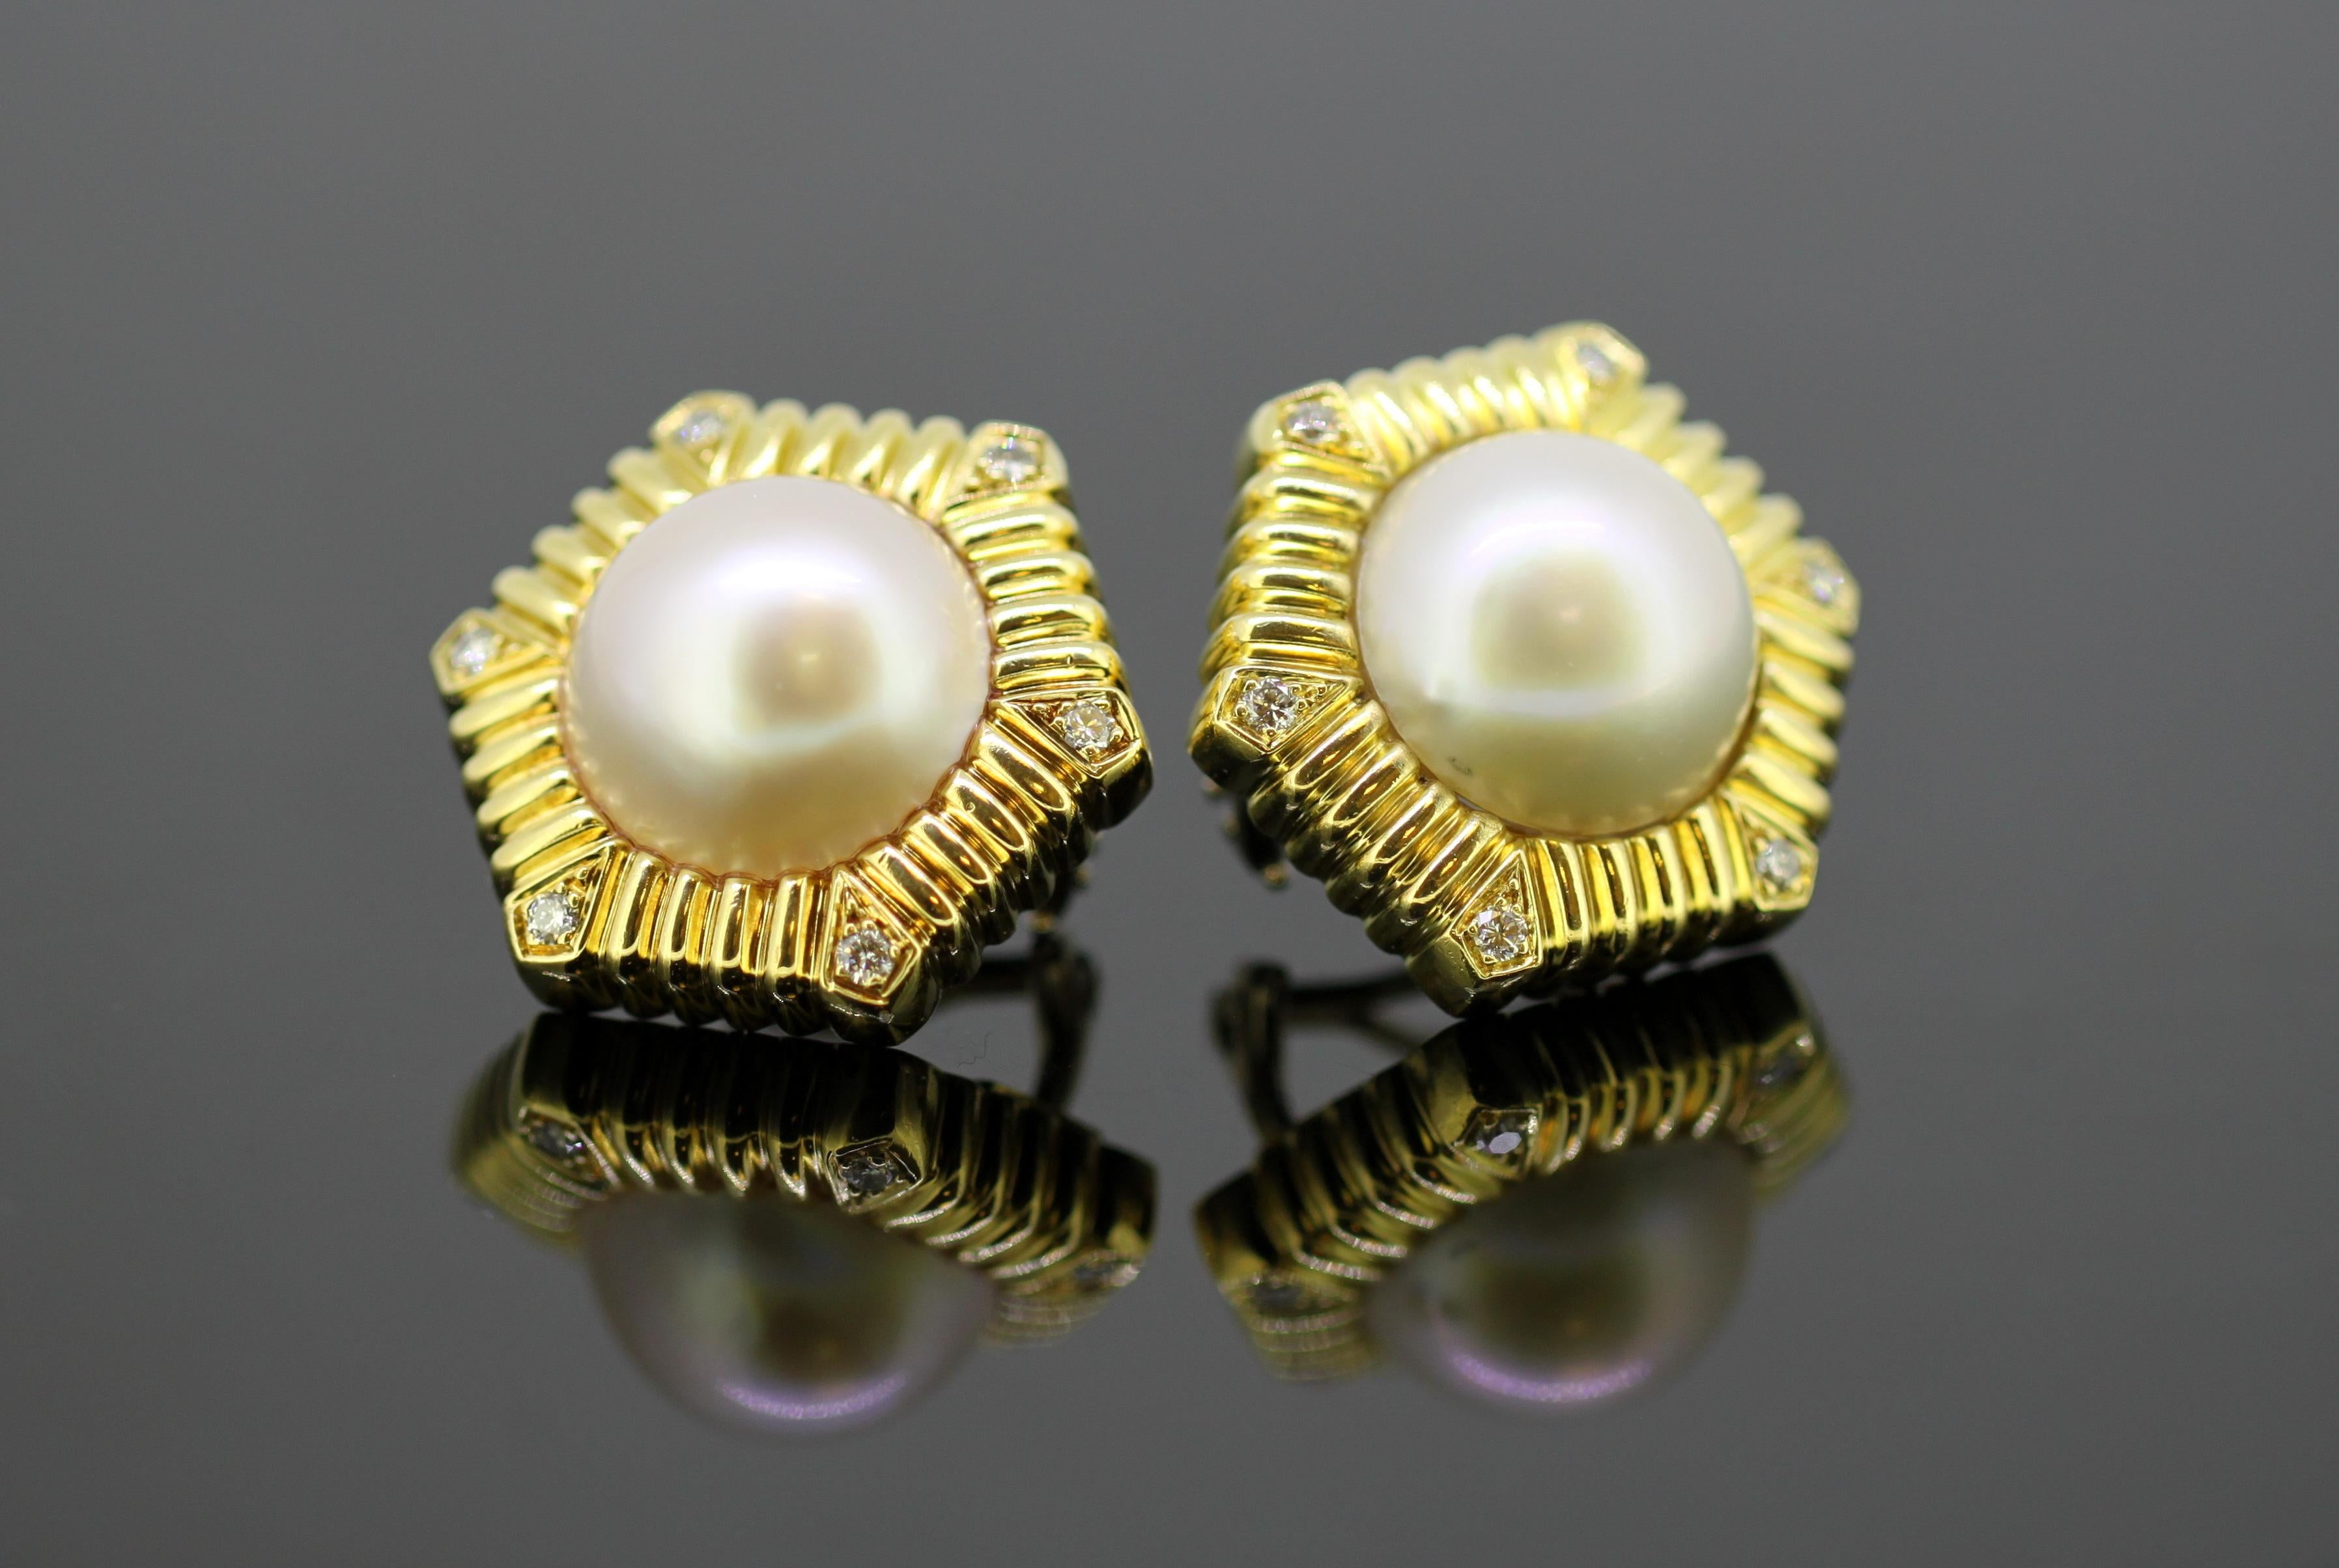 Bvcciari, 18 Karat Yellow Gold Ladies Clip-On Earrings with South Sea Pearls 3